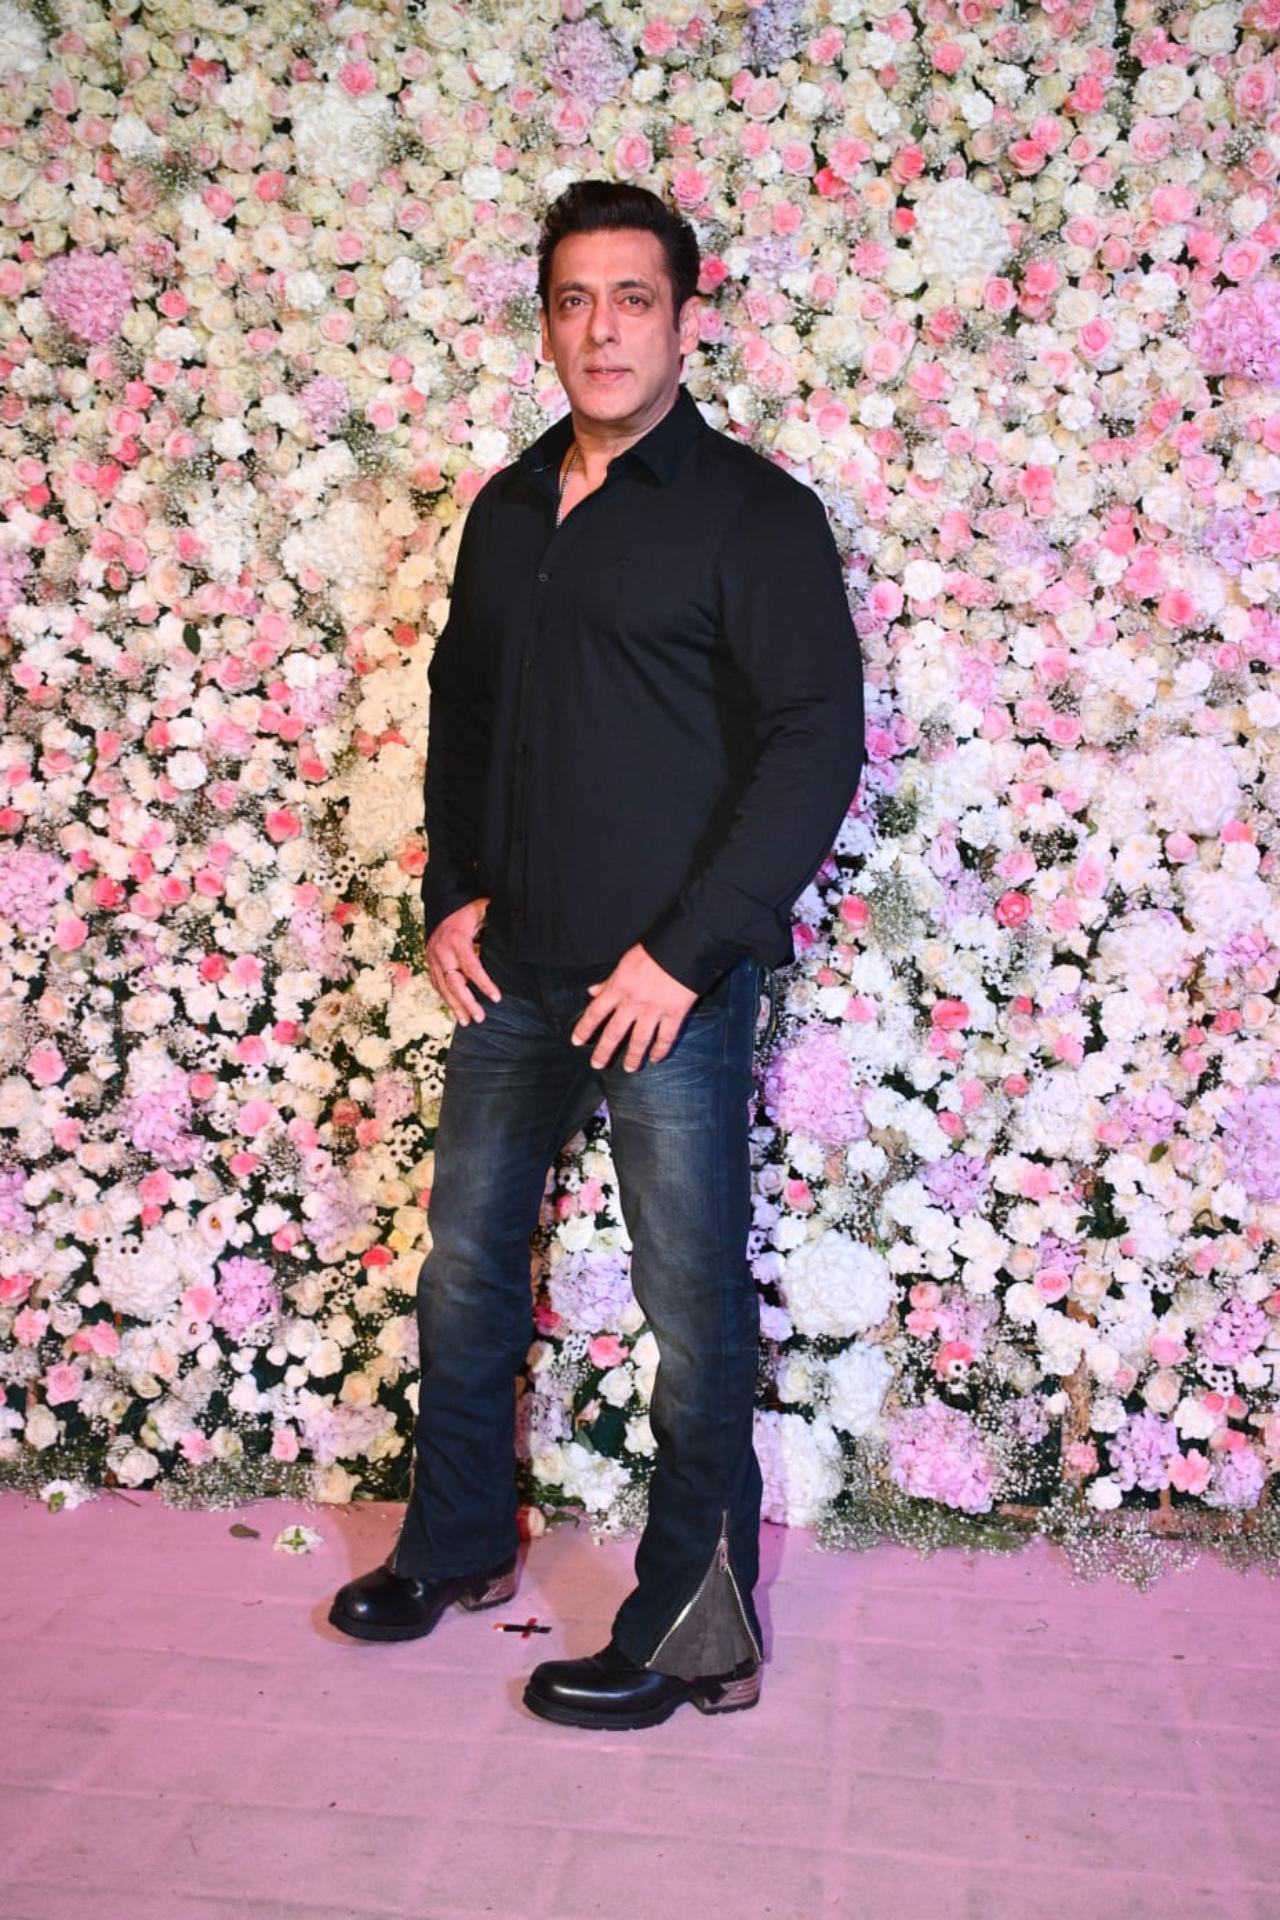 Salman Khan looked uber stylish in a black shirt and denims